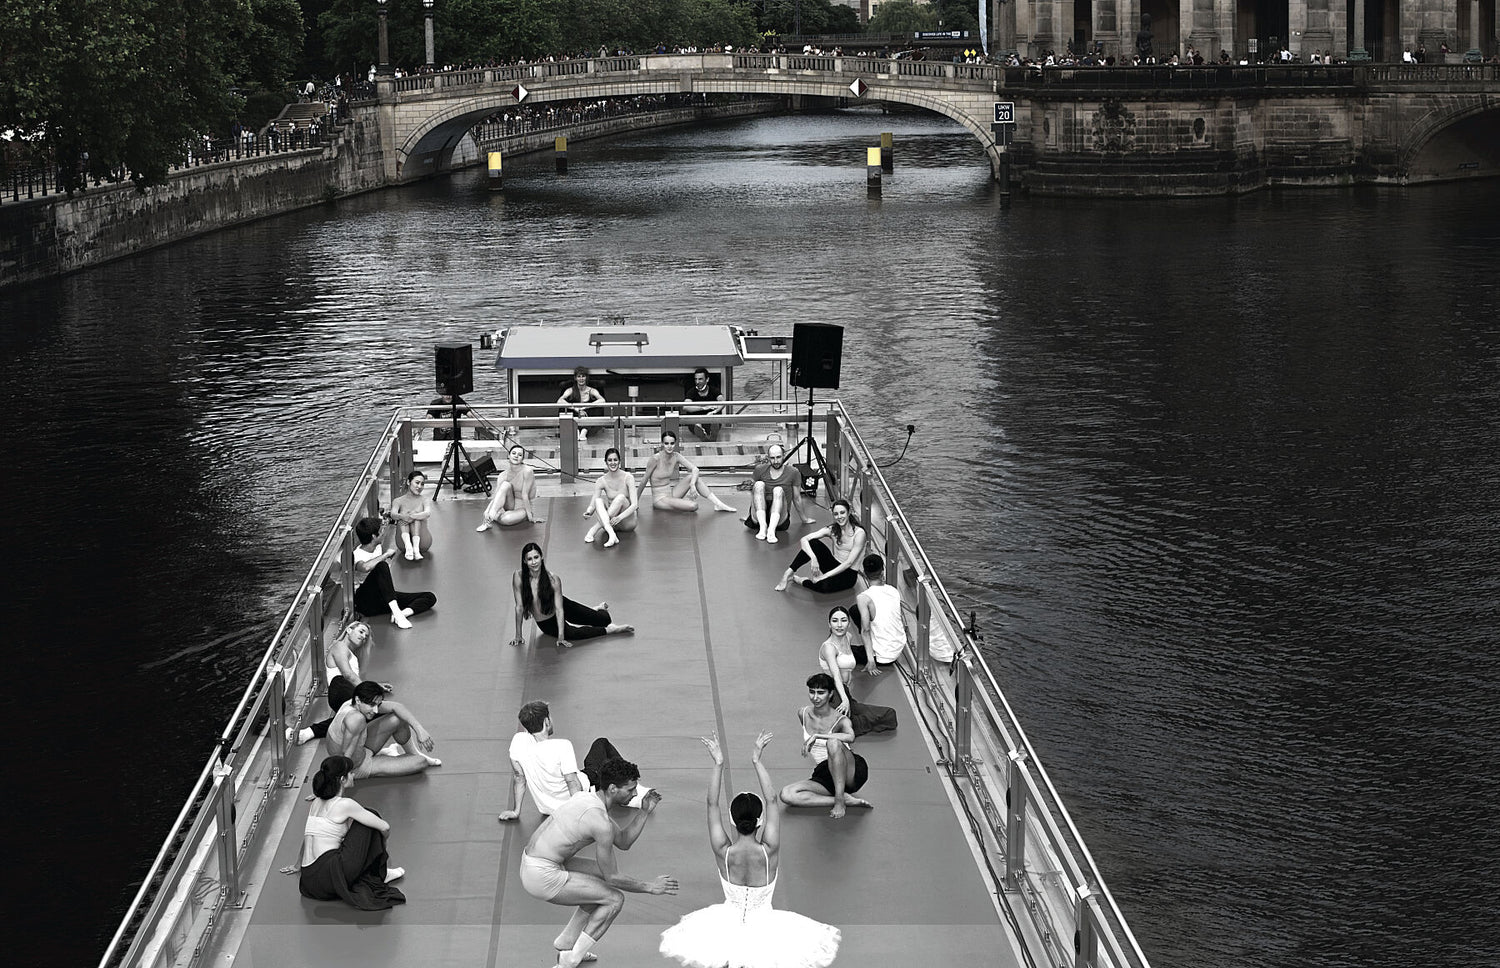 Tip to nails - Staatsballett Berlin - little boat tour FROM BERLIN WITH LOVE - ON THE RIVER SPREE! © Prosper Jerominus 2021 - Fuji Gloss